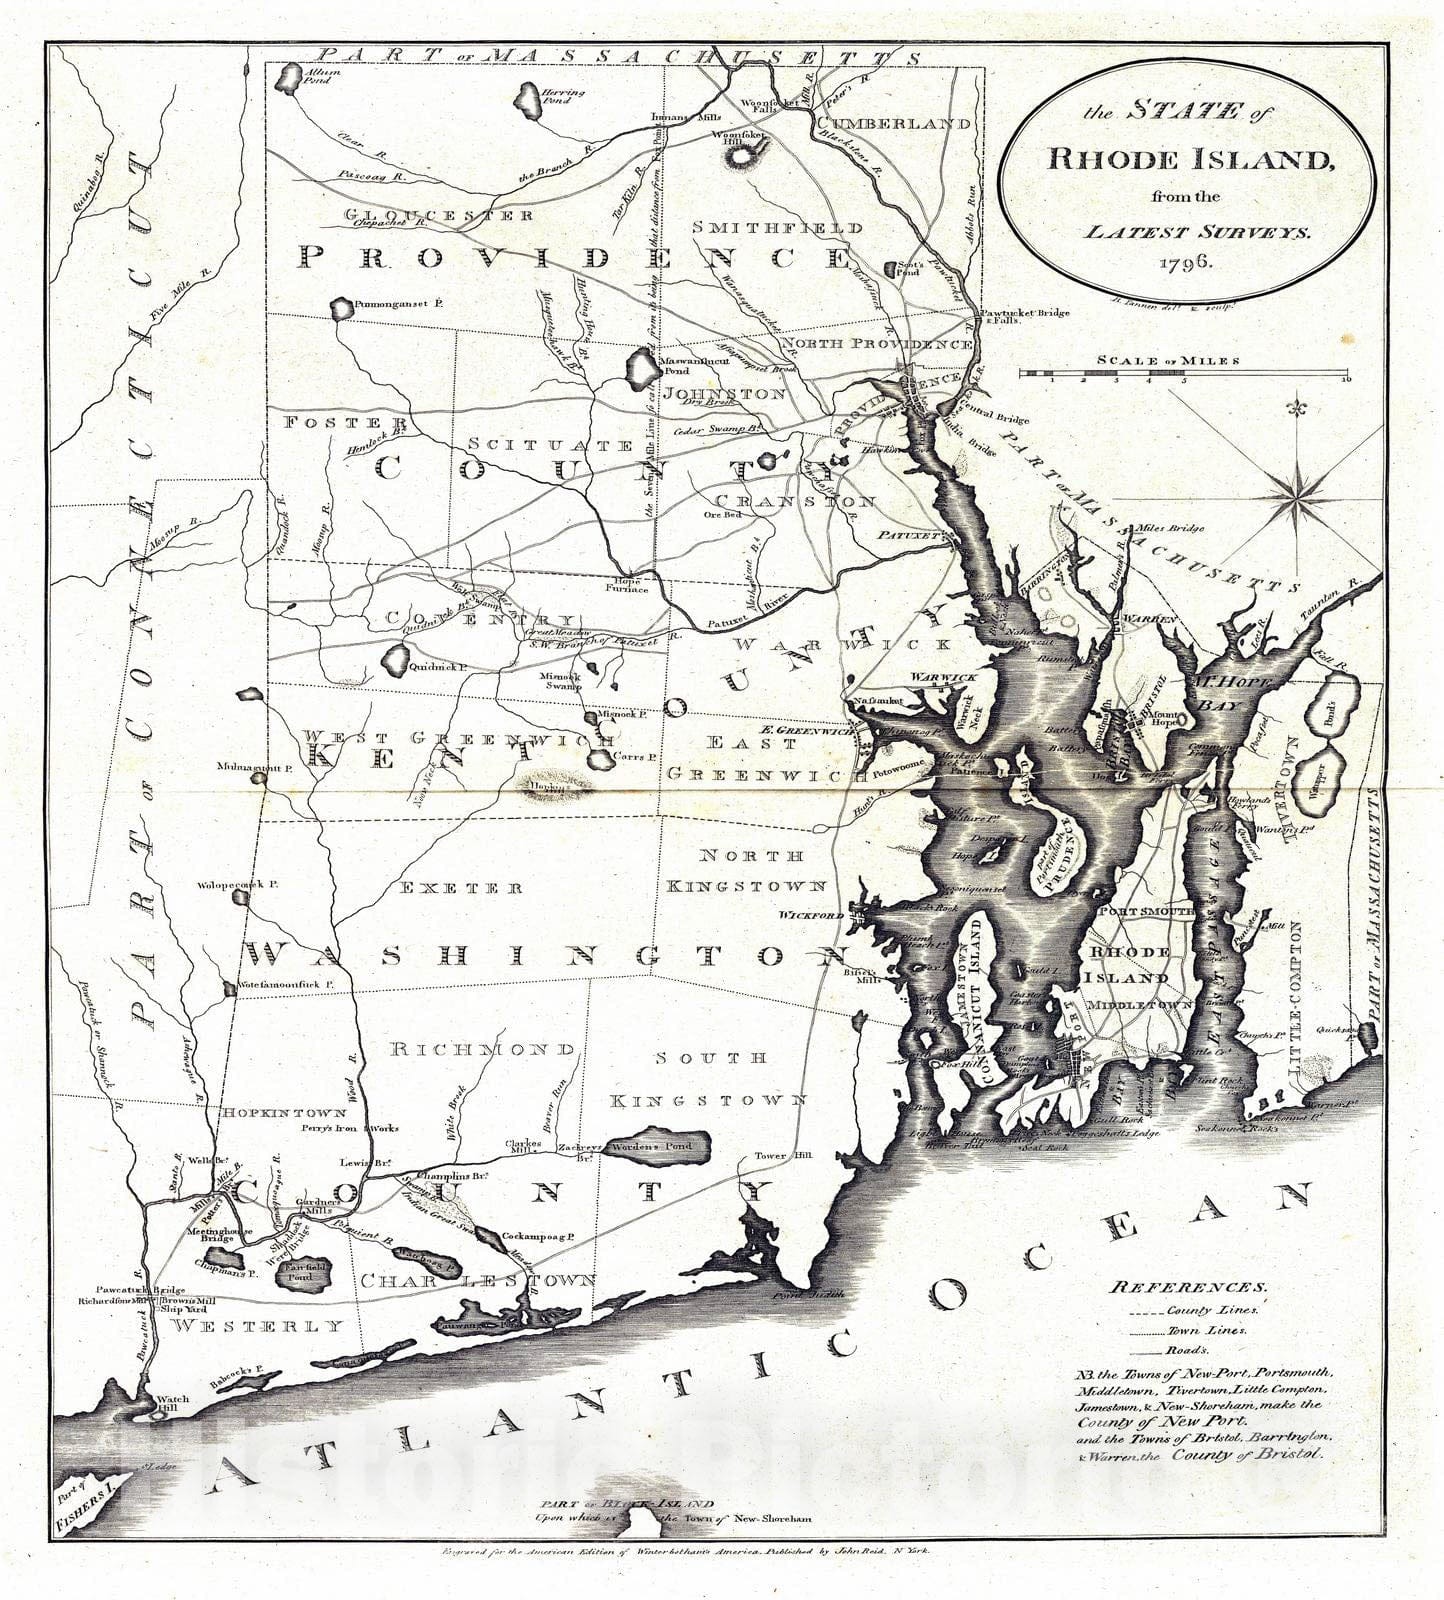 Historic Wall Map : National Atlas - 1796 State of Rhode Island. - Vintage Wall Art